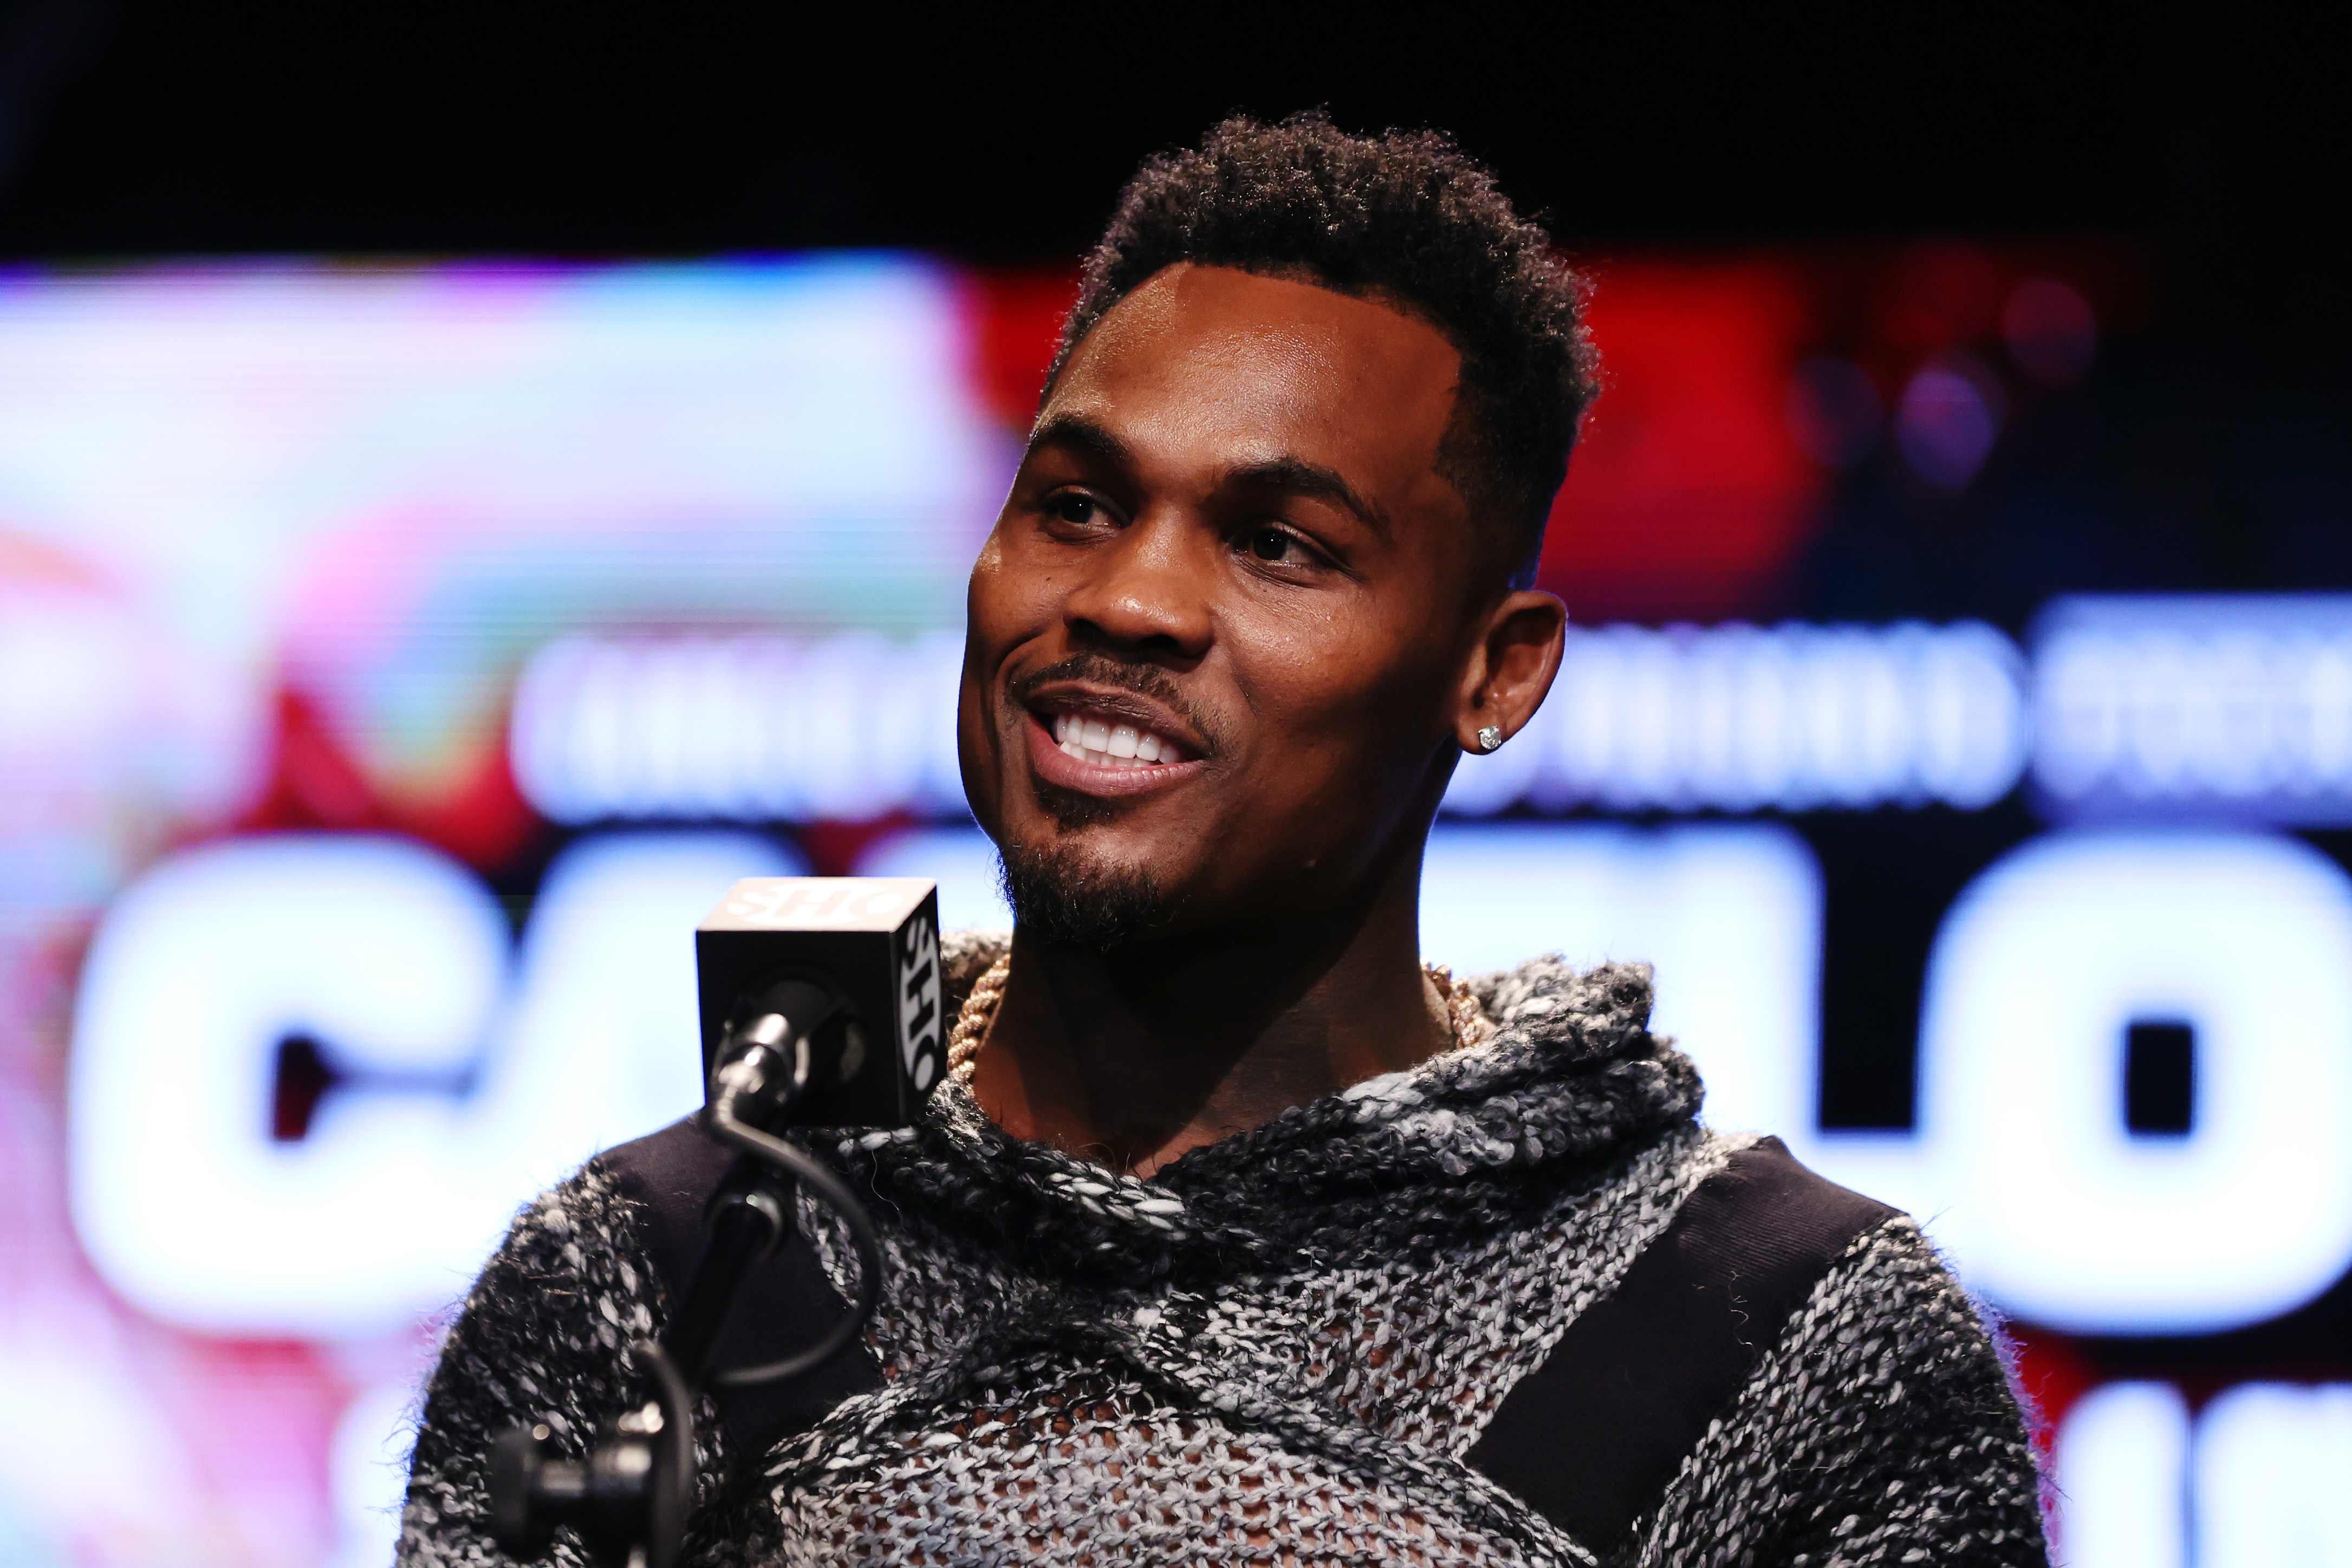 Jermell Charlo says he’s feeling calm and prepared for this opportunity against Canelo Alvarez.